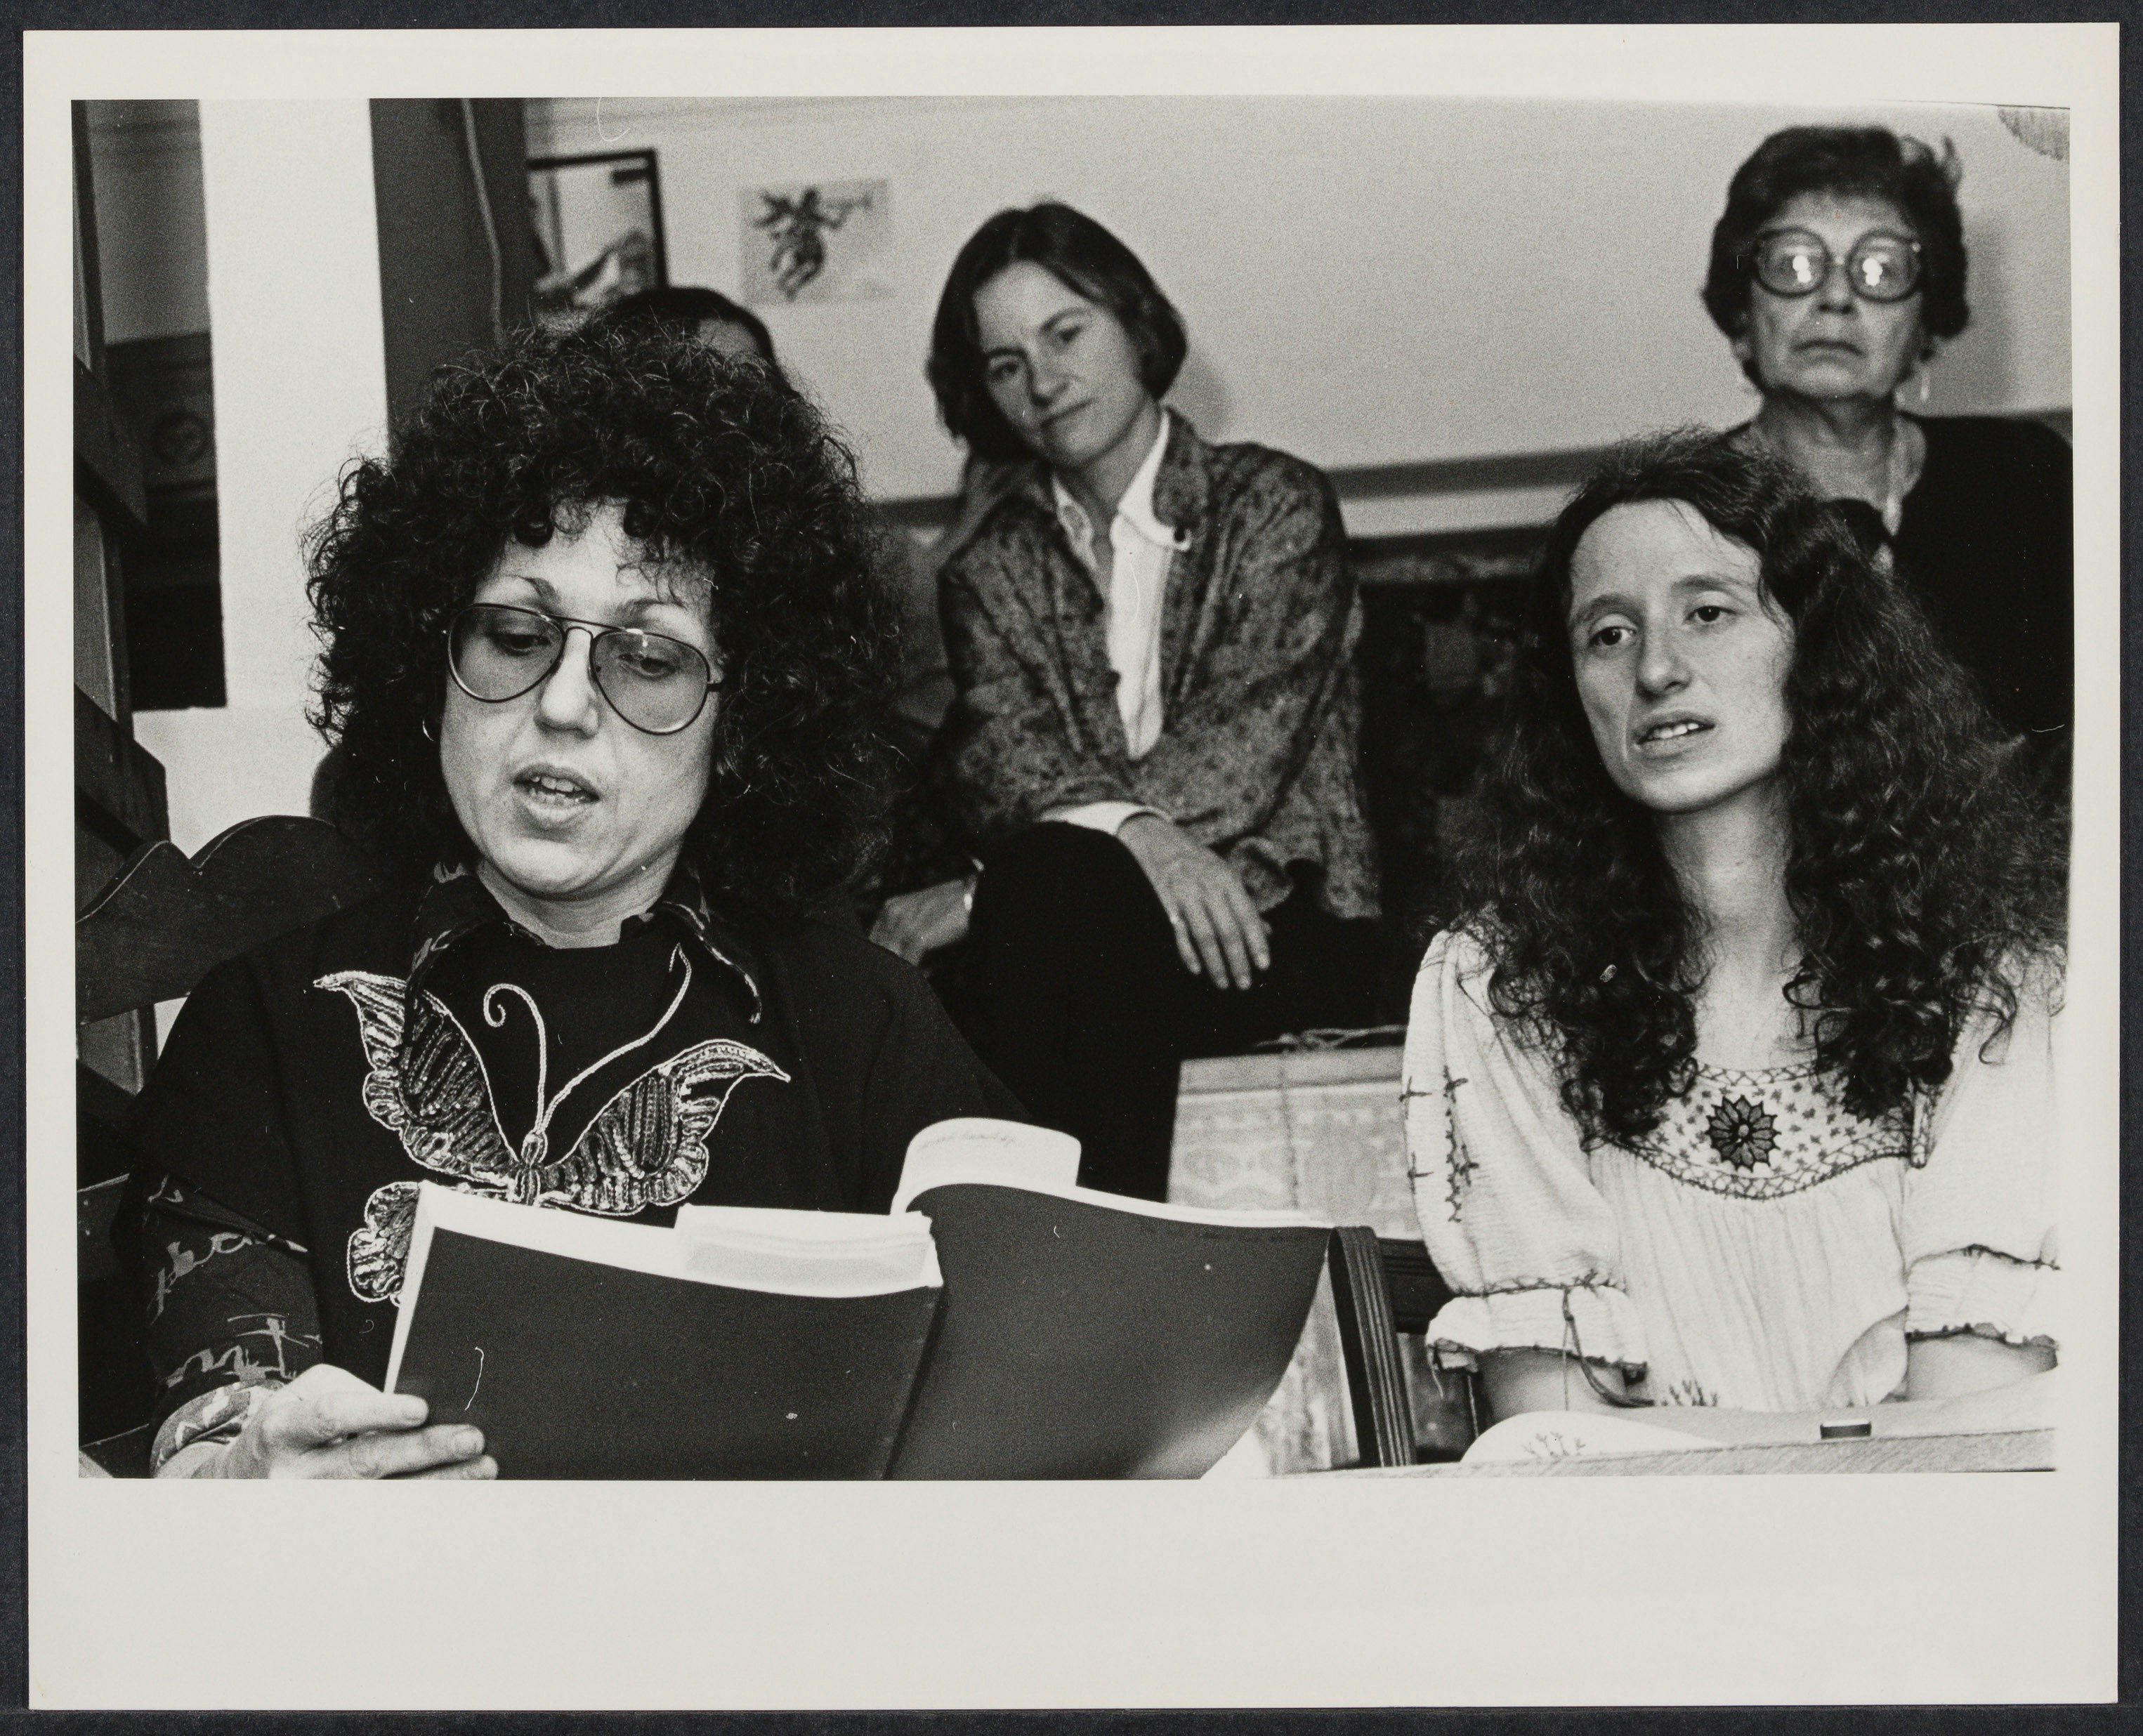 Judy Chicago reading "Revelations of the Goddess: A Chronical of the Dinner Party" at the Woman's Salon